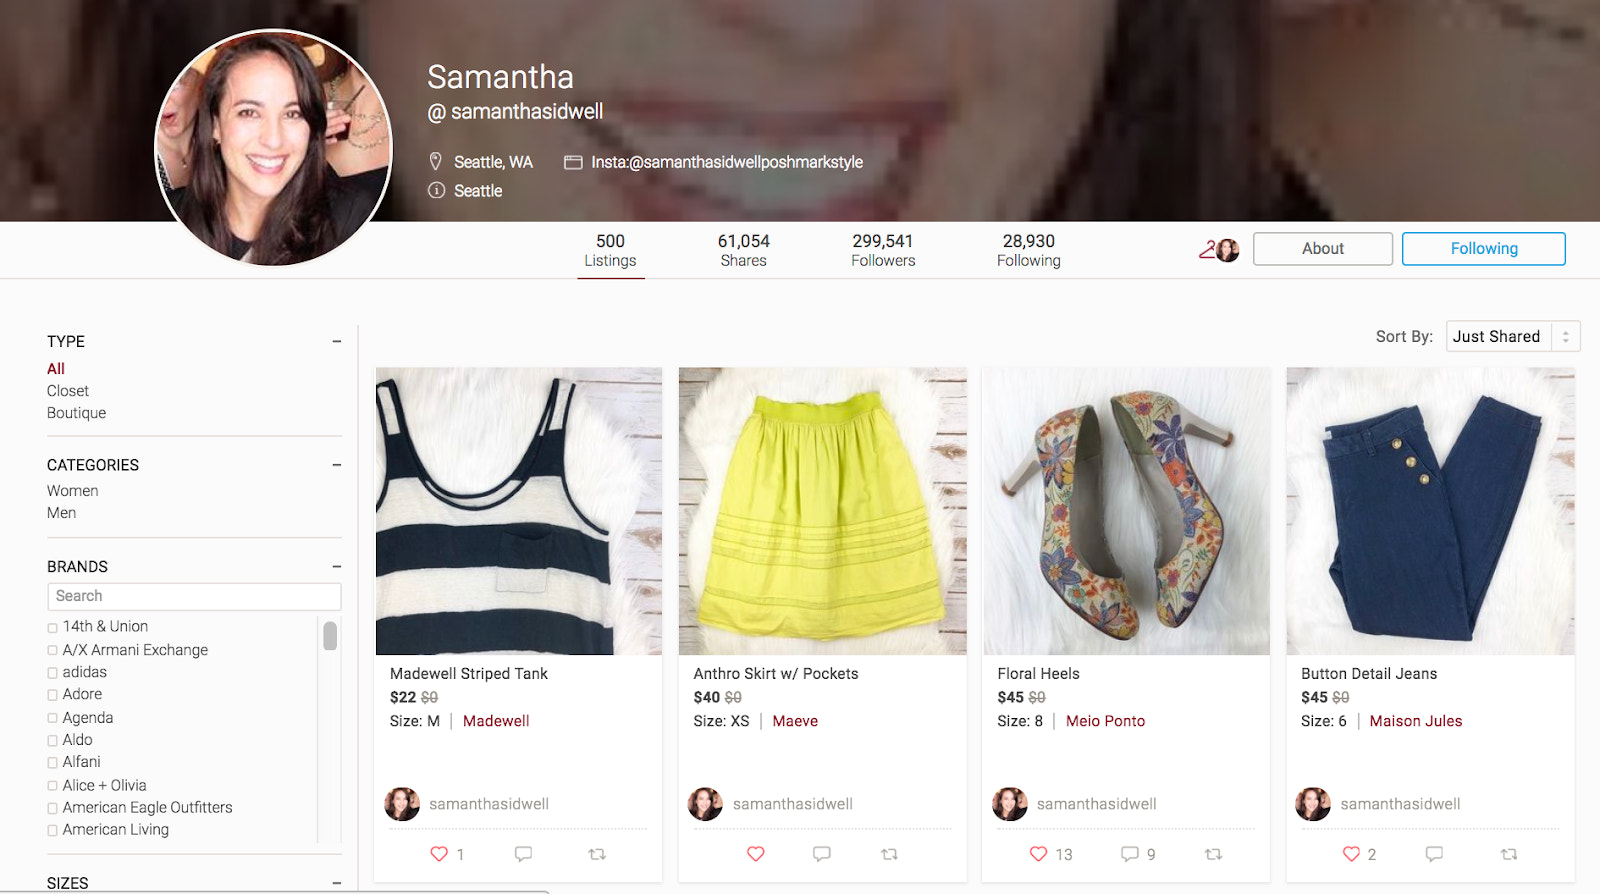 Screengrab of a Poshmark page showing a user's collection of clothes for resale